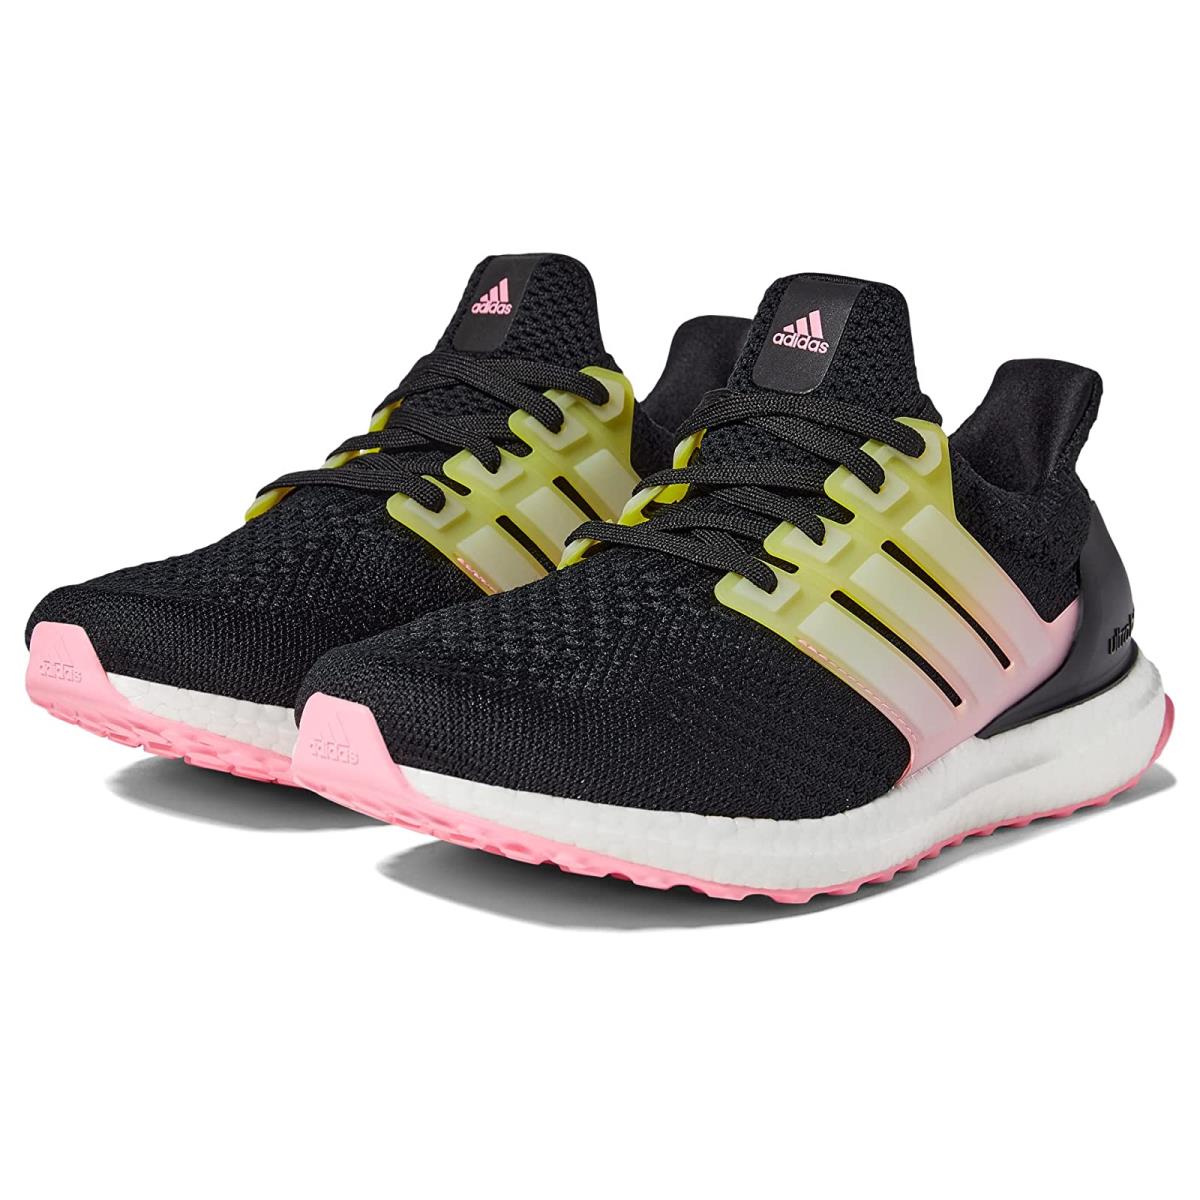 Woman`s Sneakers Athletic Shoes Adidas Running Ultraboost 5.0 Black/White/Beam Pink